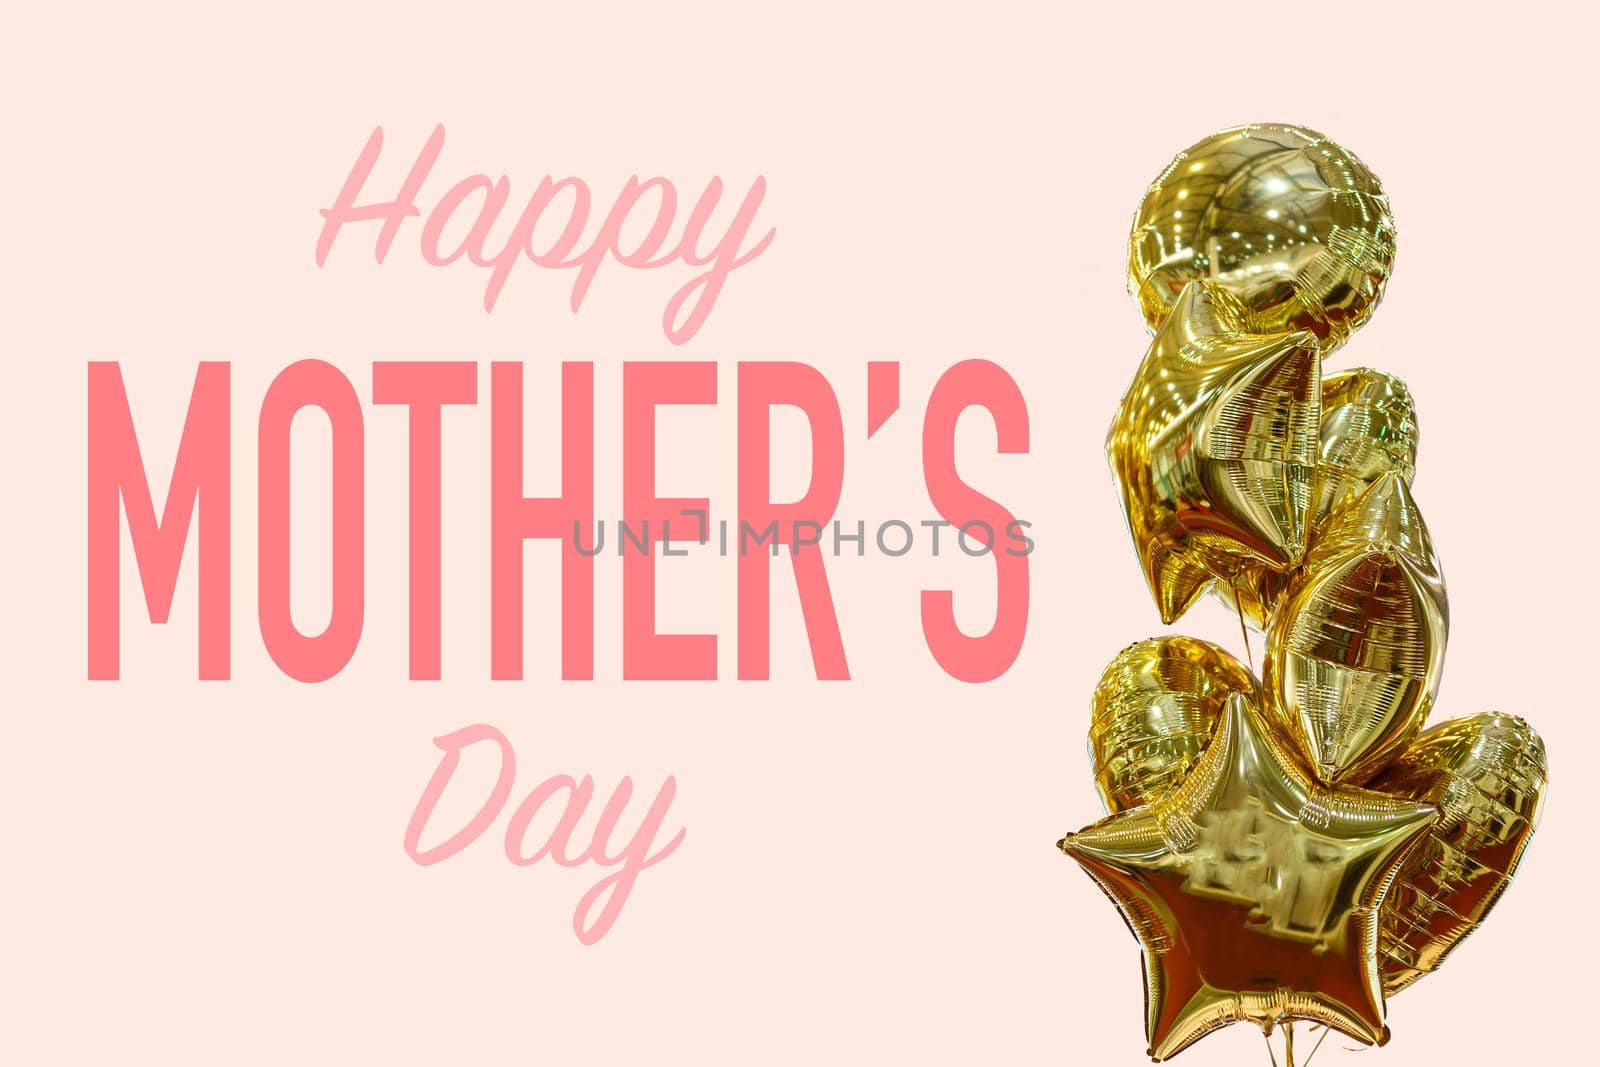 Top view aerial image of decoration Happy mothers day holiday background concept